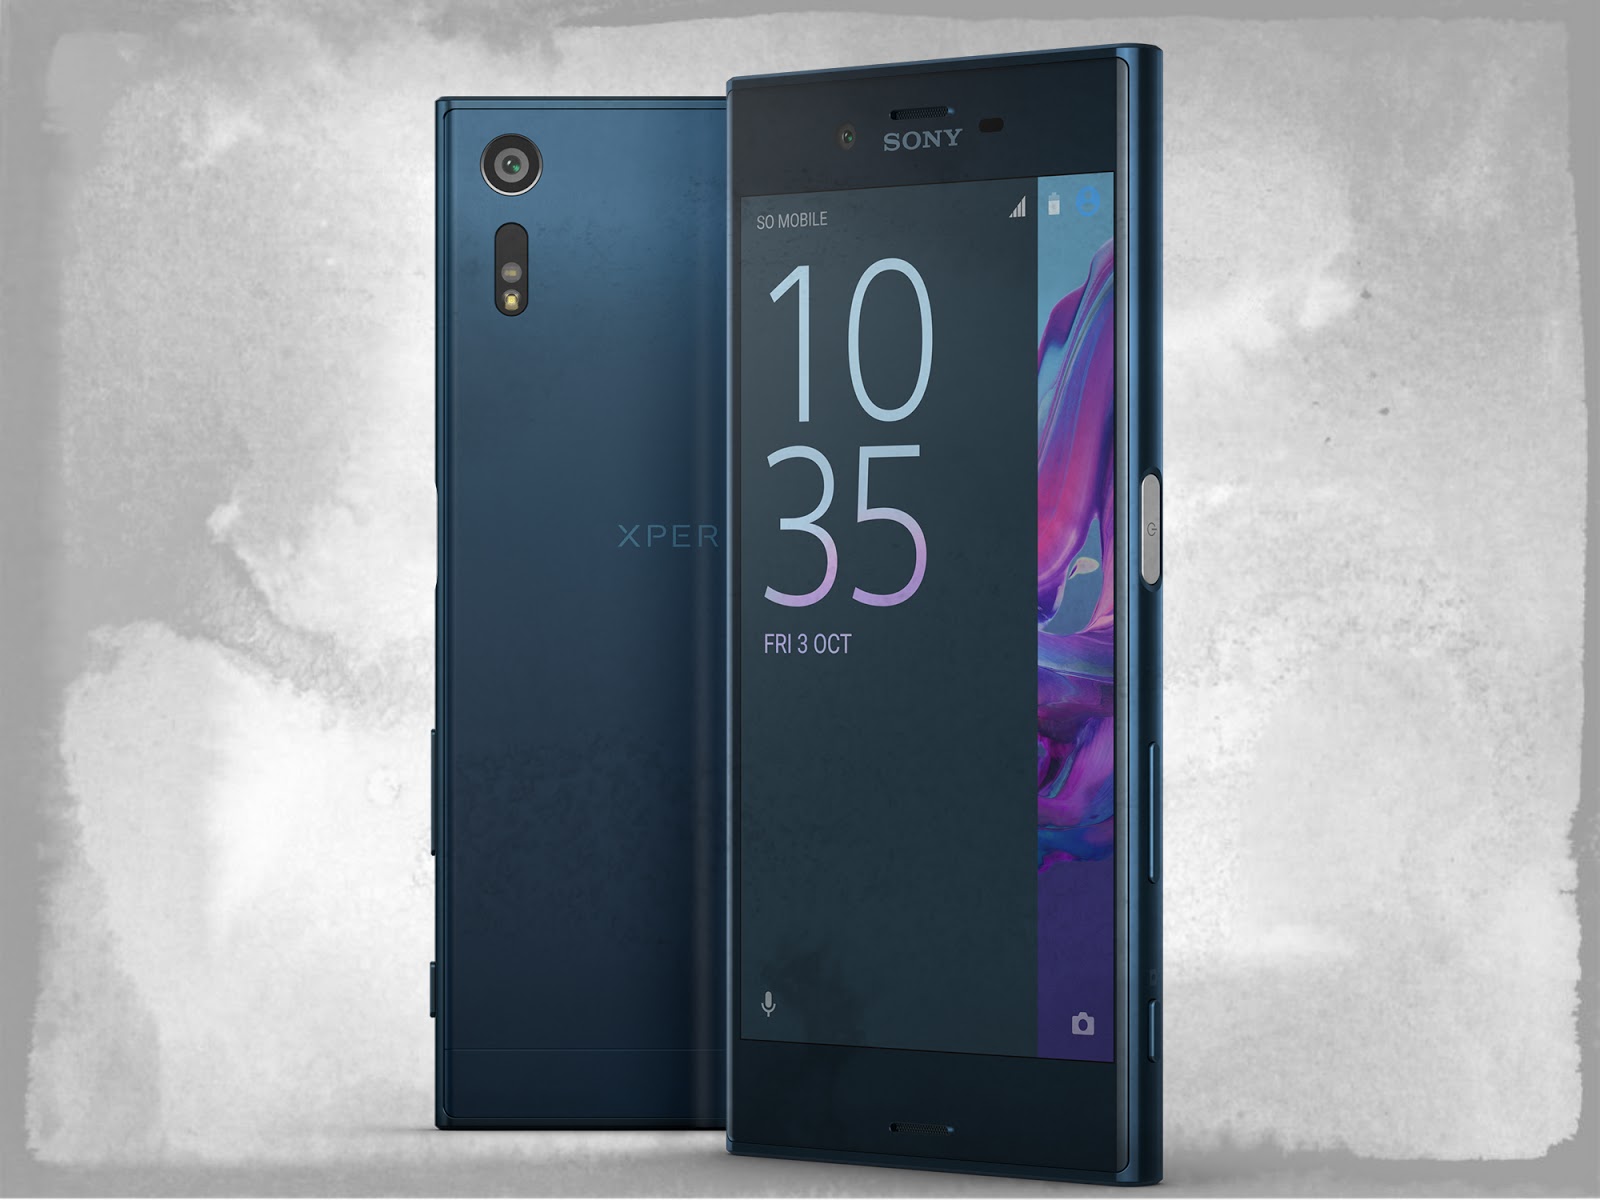 We Tested The Sony Xperia XZ